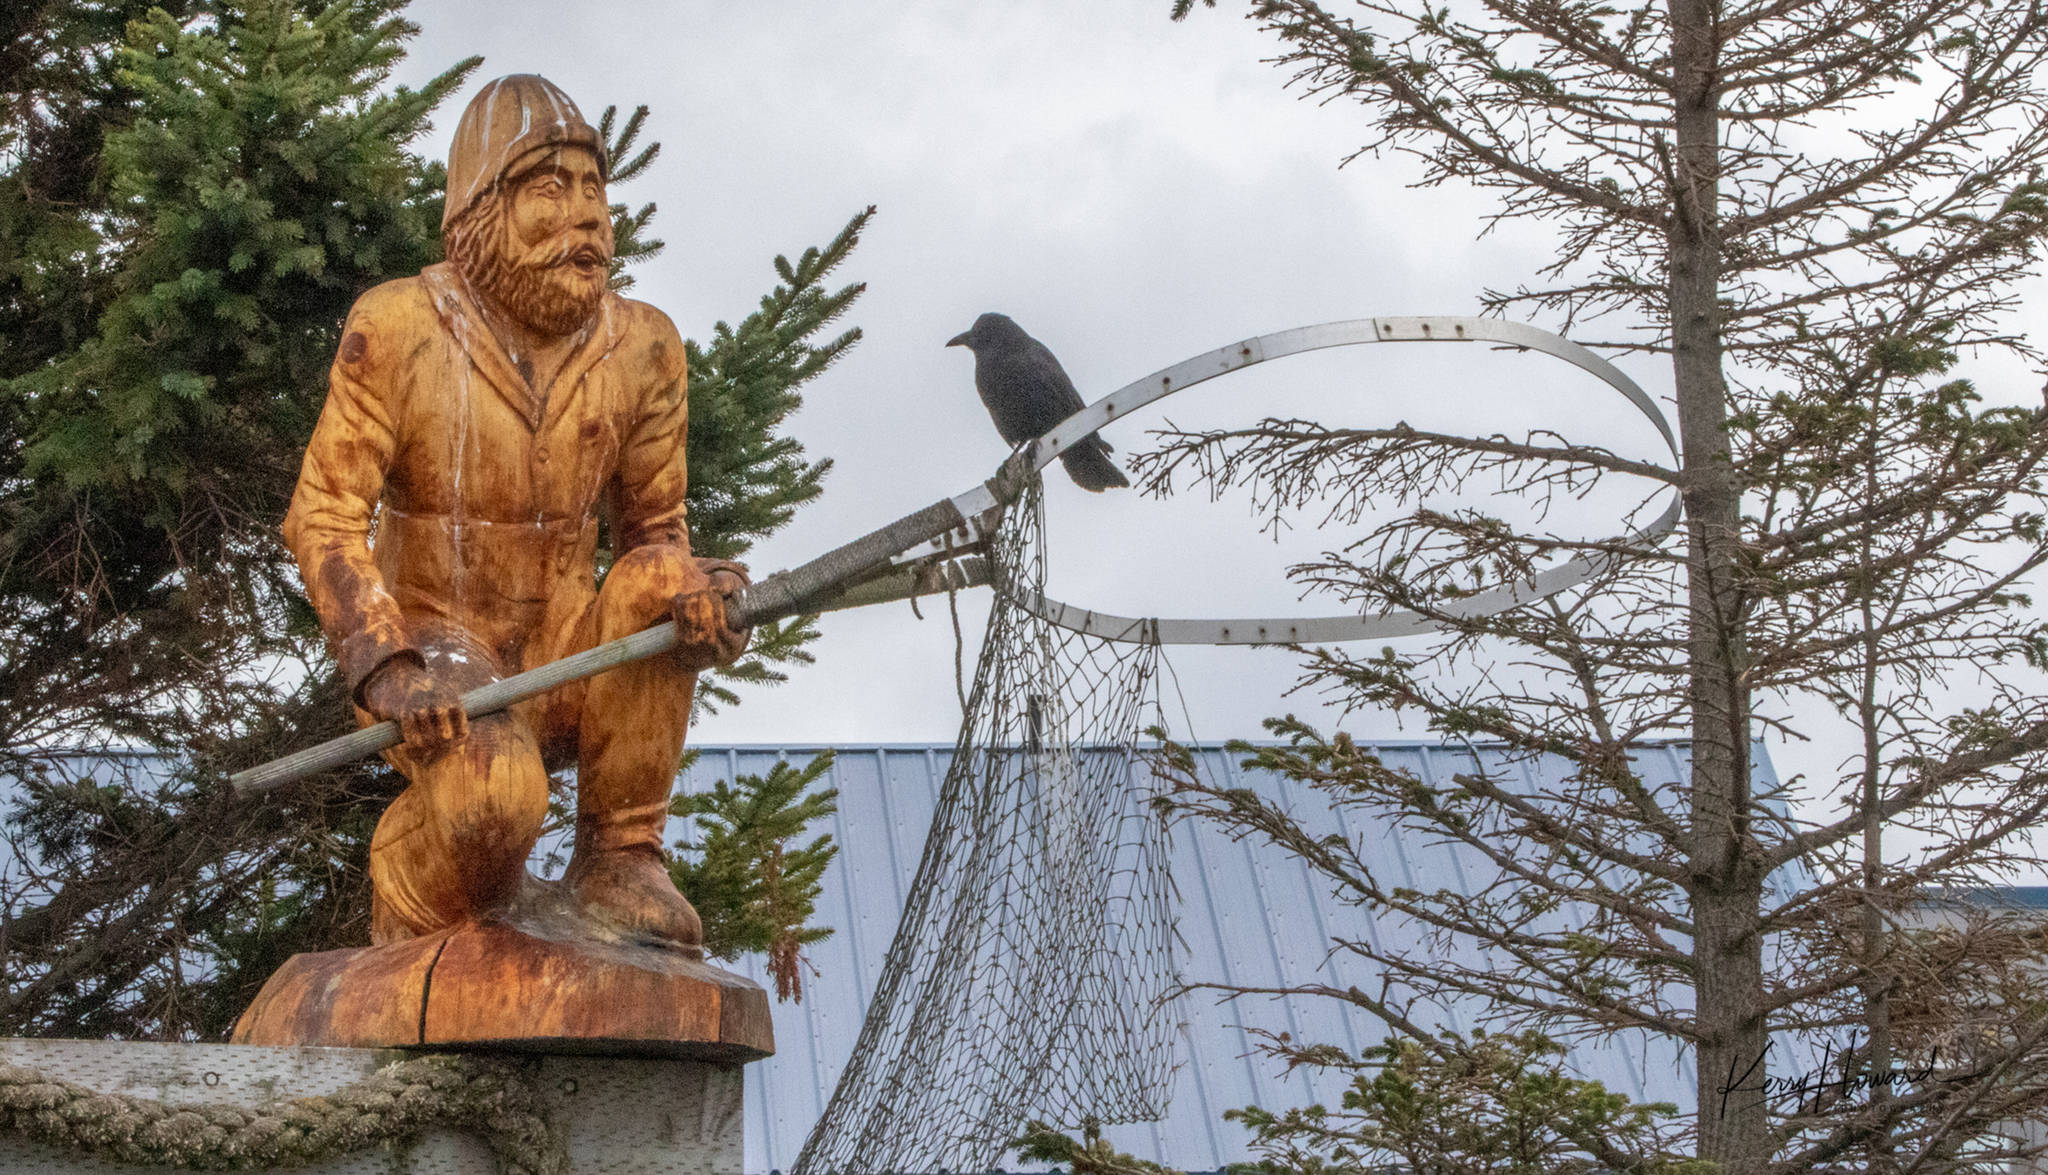 ”Hey, where’s my fish?” asked the crow on this fisherman’s sculpture. (Courtesy Photo | Kerry Howard)